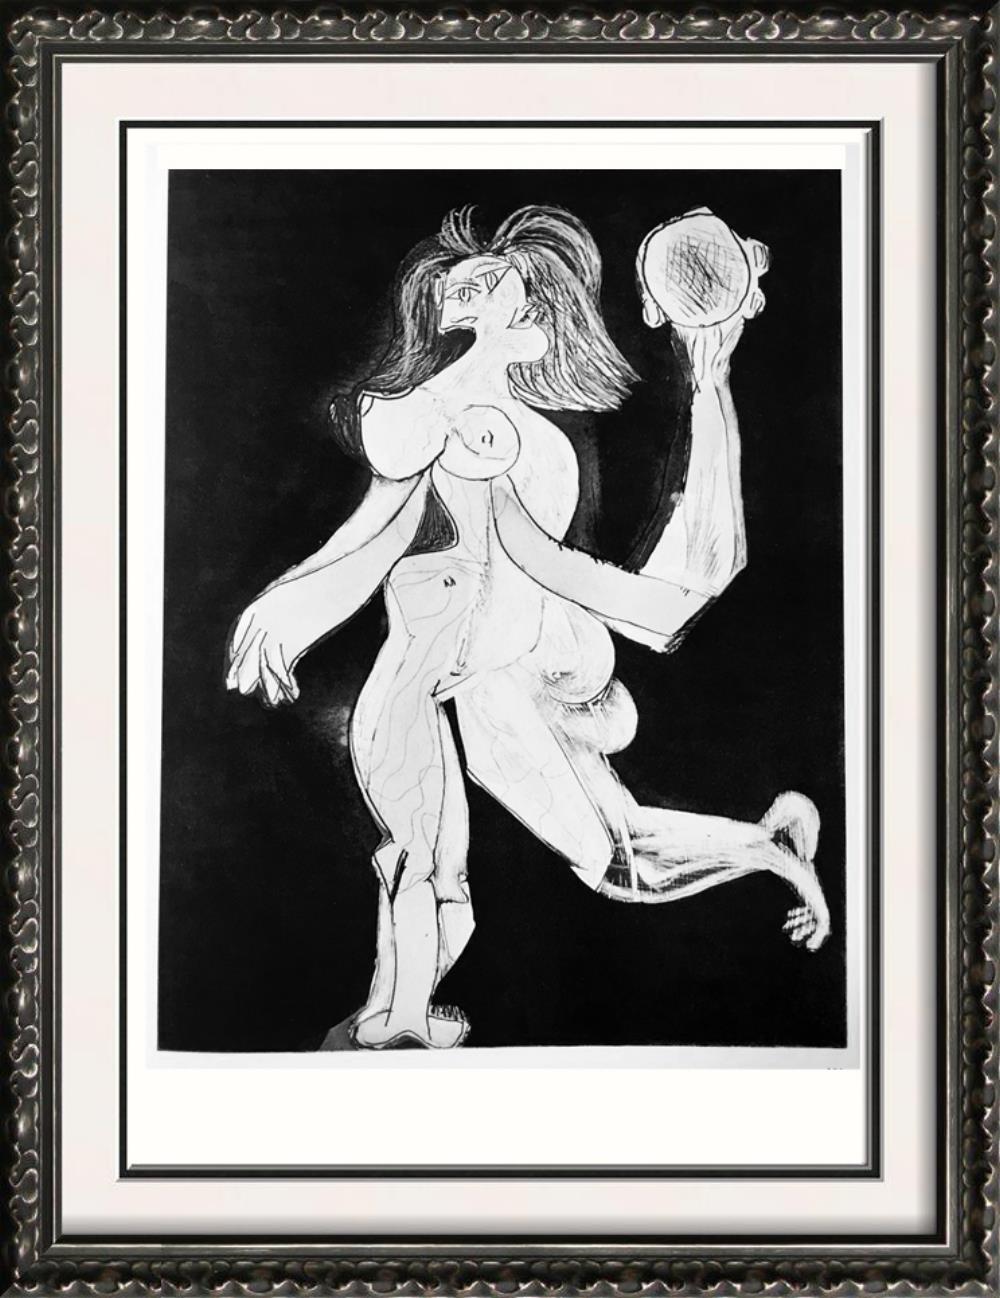 Pablo Picasso Dance with Tambourine c. 1938 Fine Art Print from Museum Artist